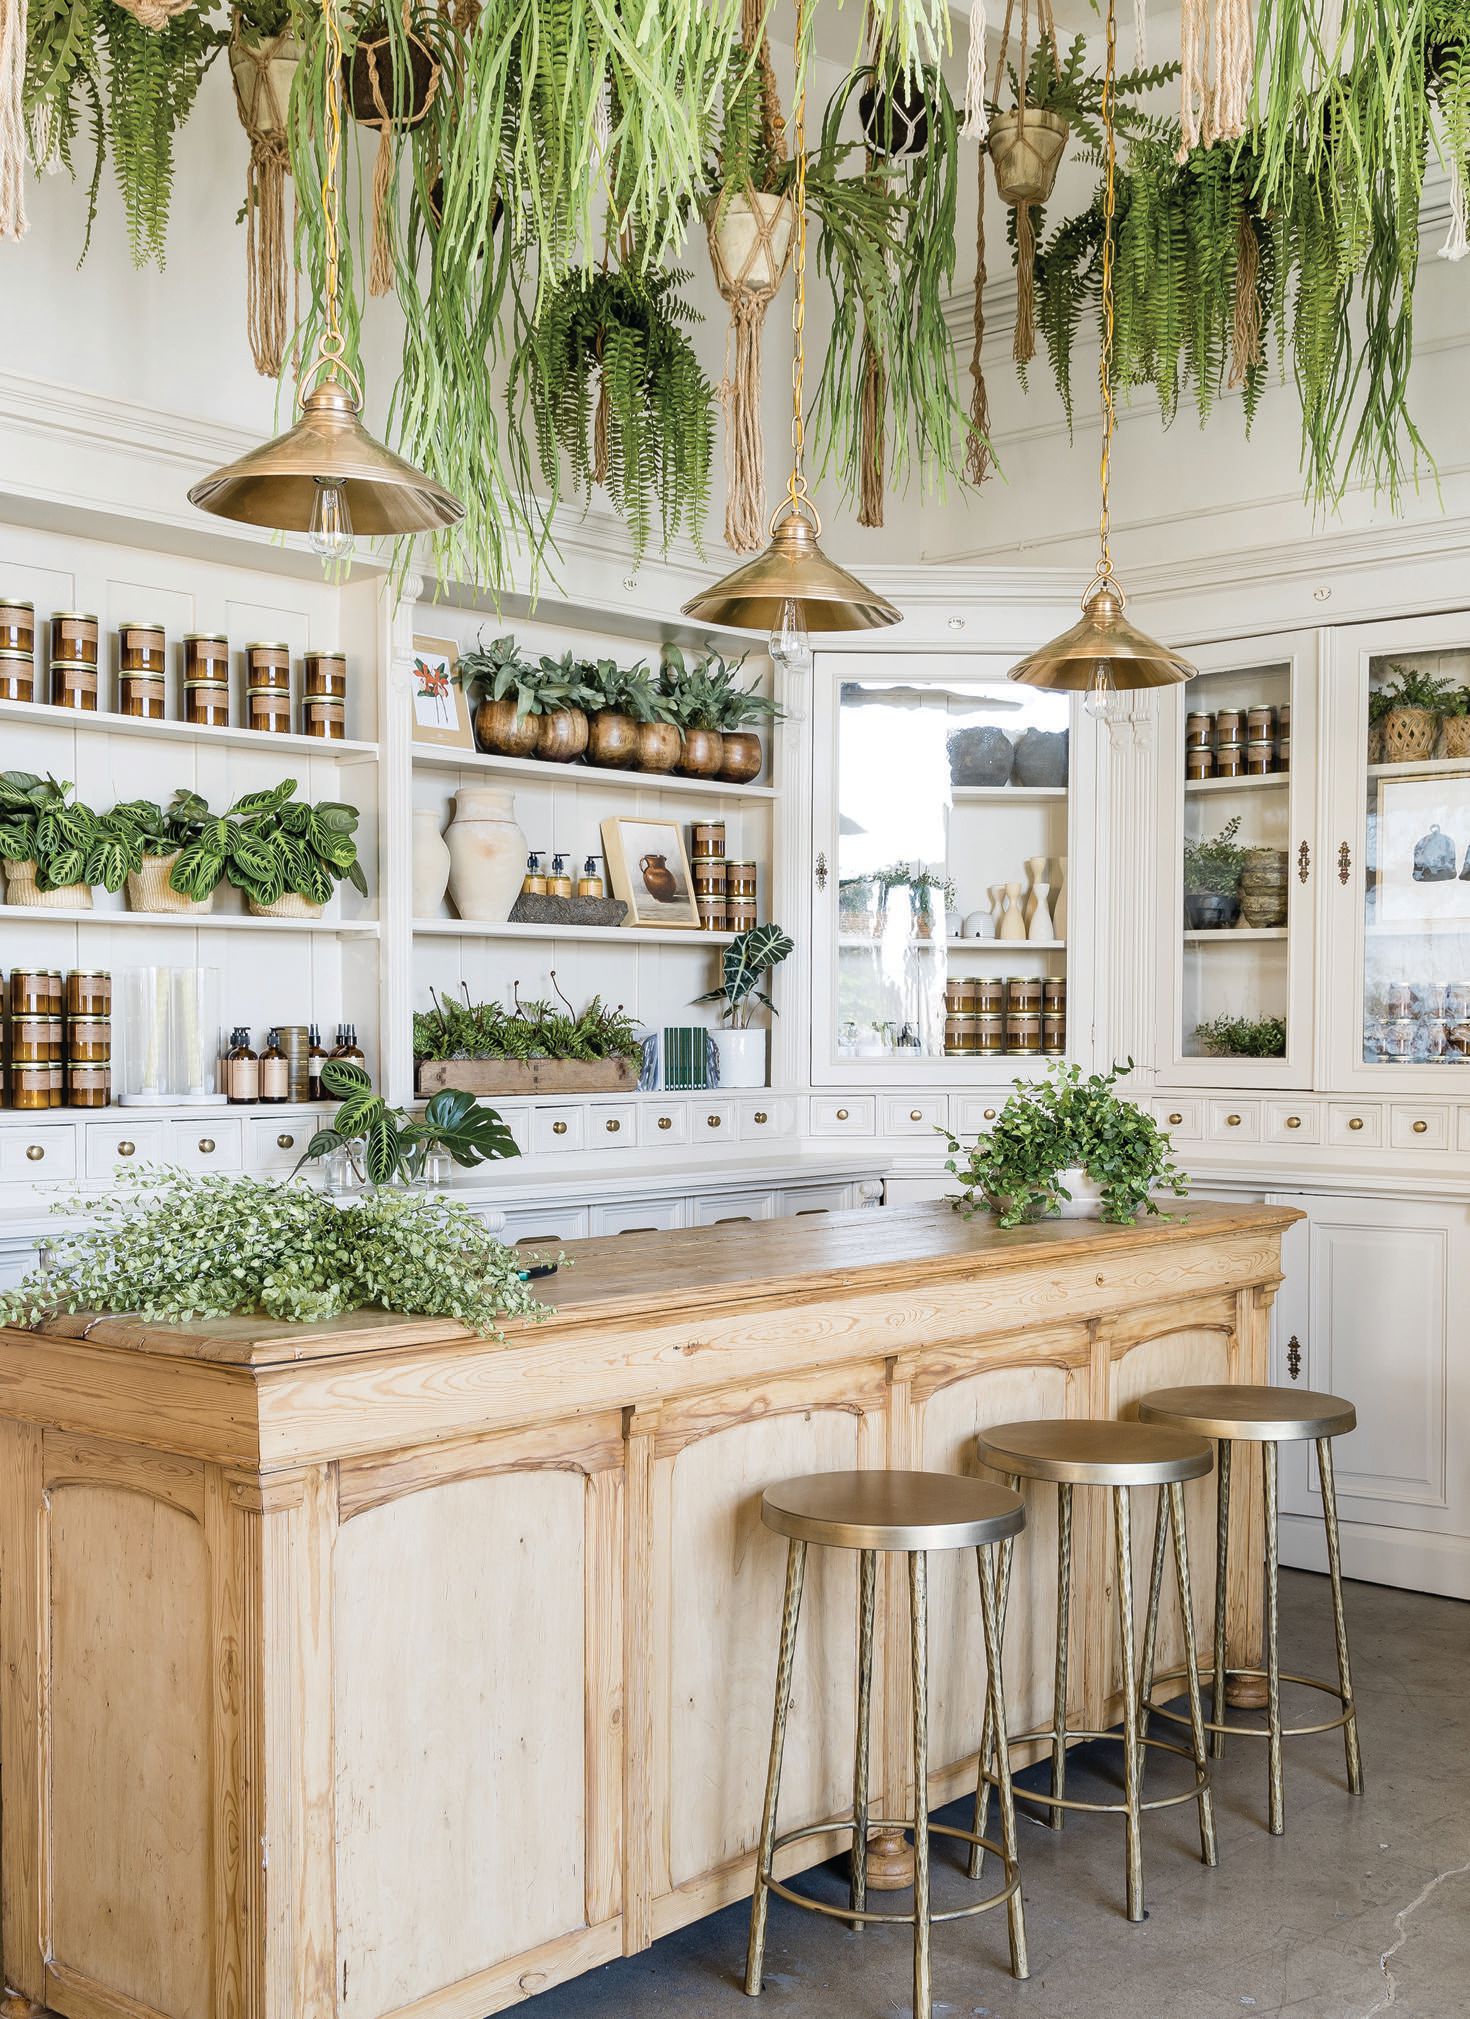 The apothecary area at the new Pure Salt Shoppe in Newport Beach PHOTO BY VANESSA LENTINE